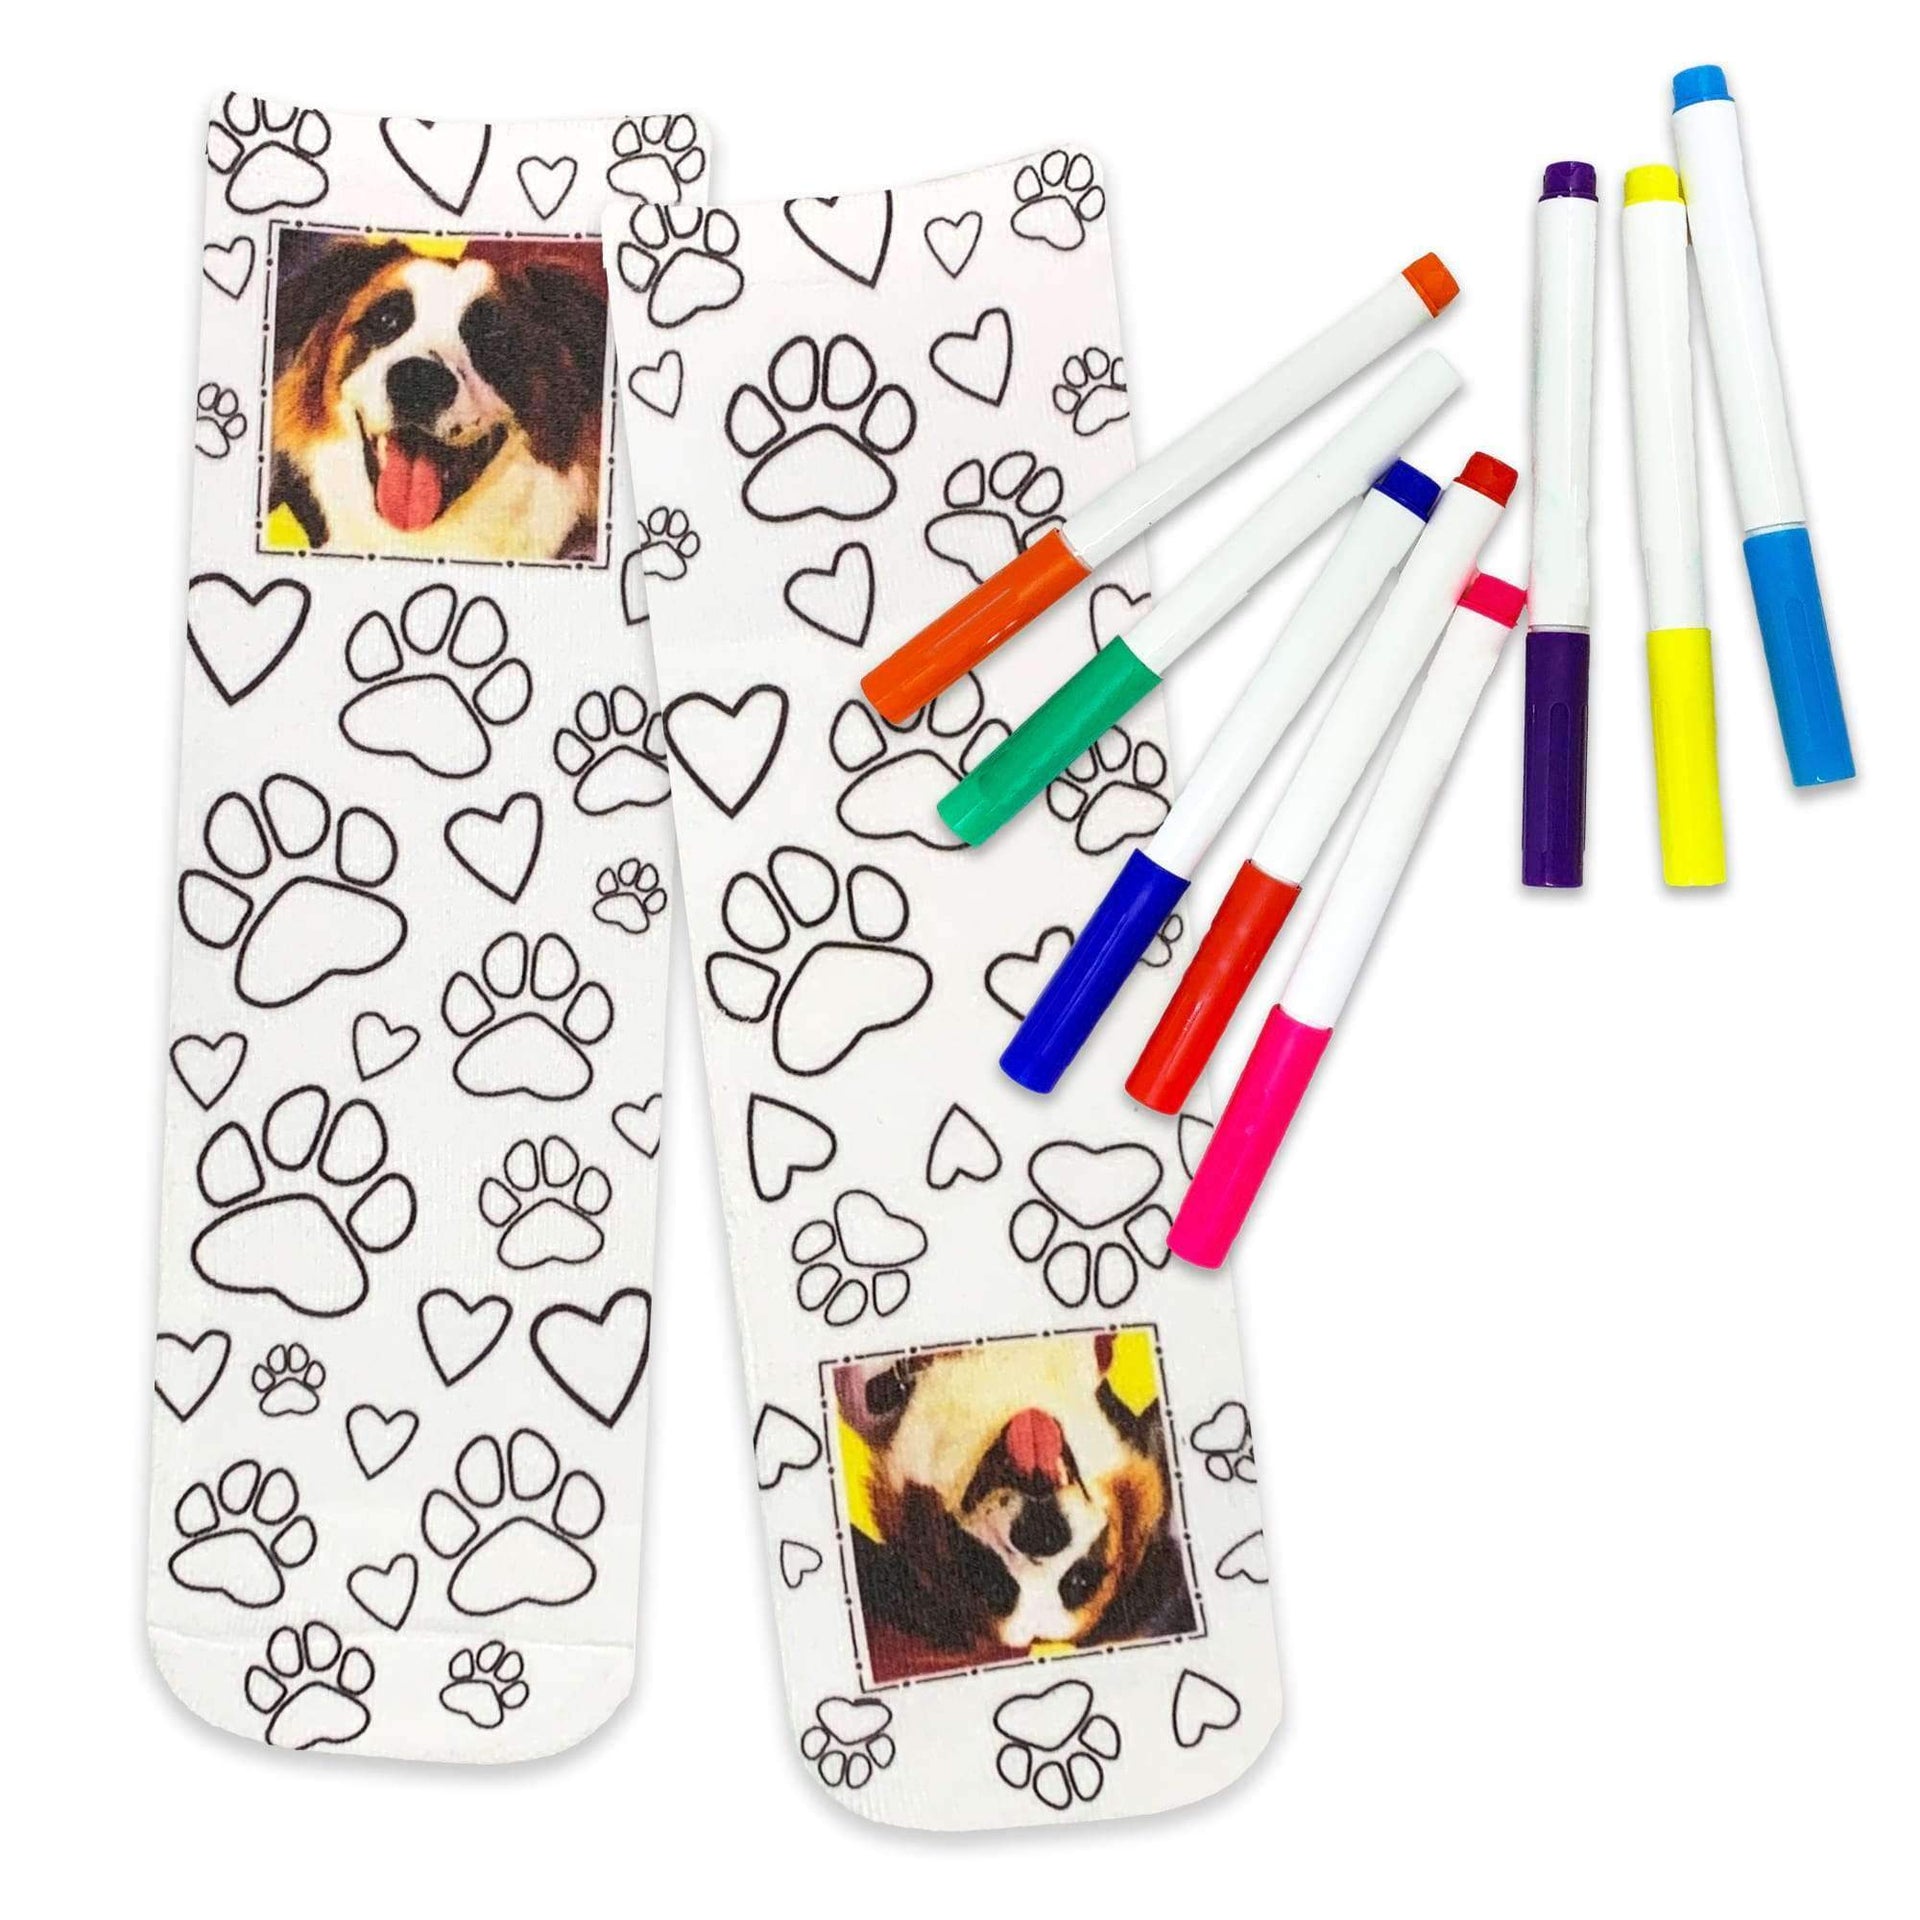 Custom printed paw design personalized with your photo digitally printed on cotton crew socks.